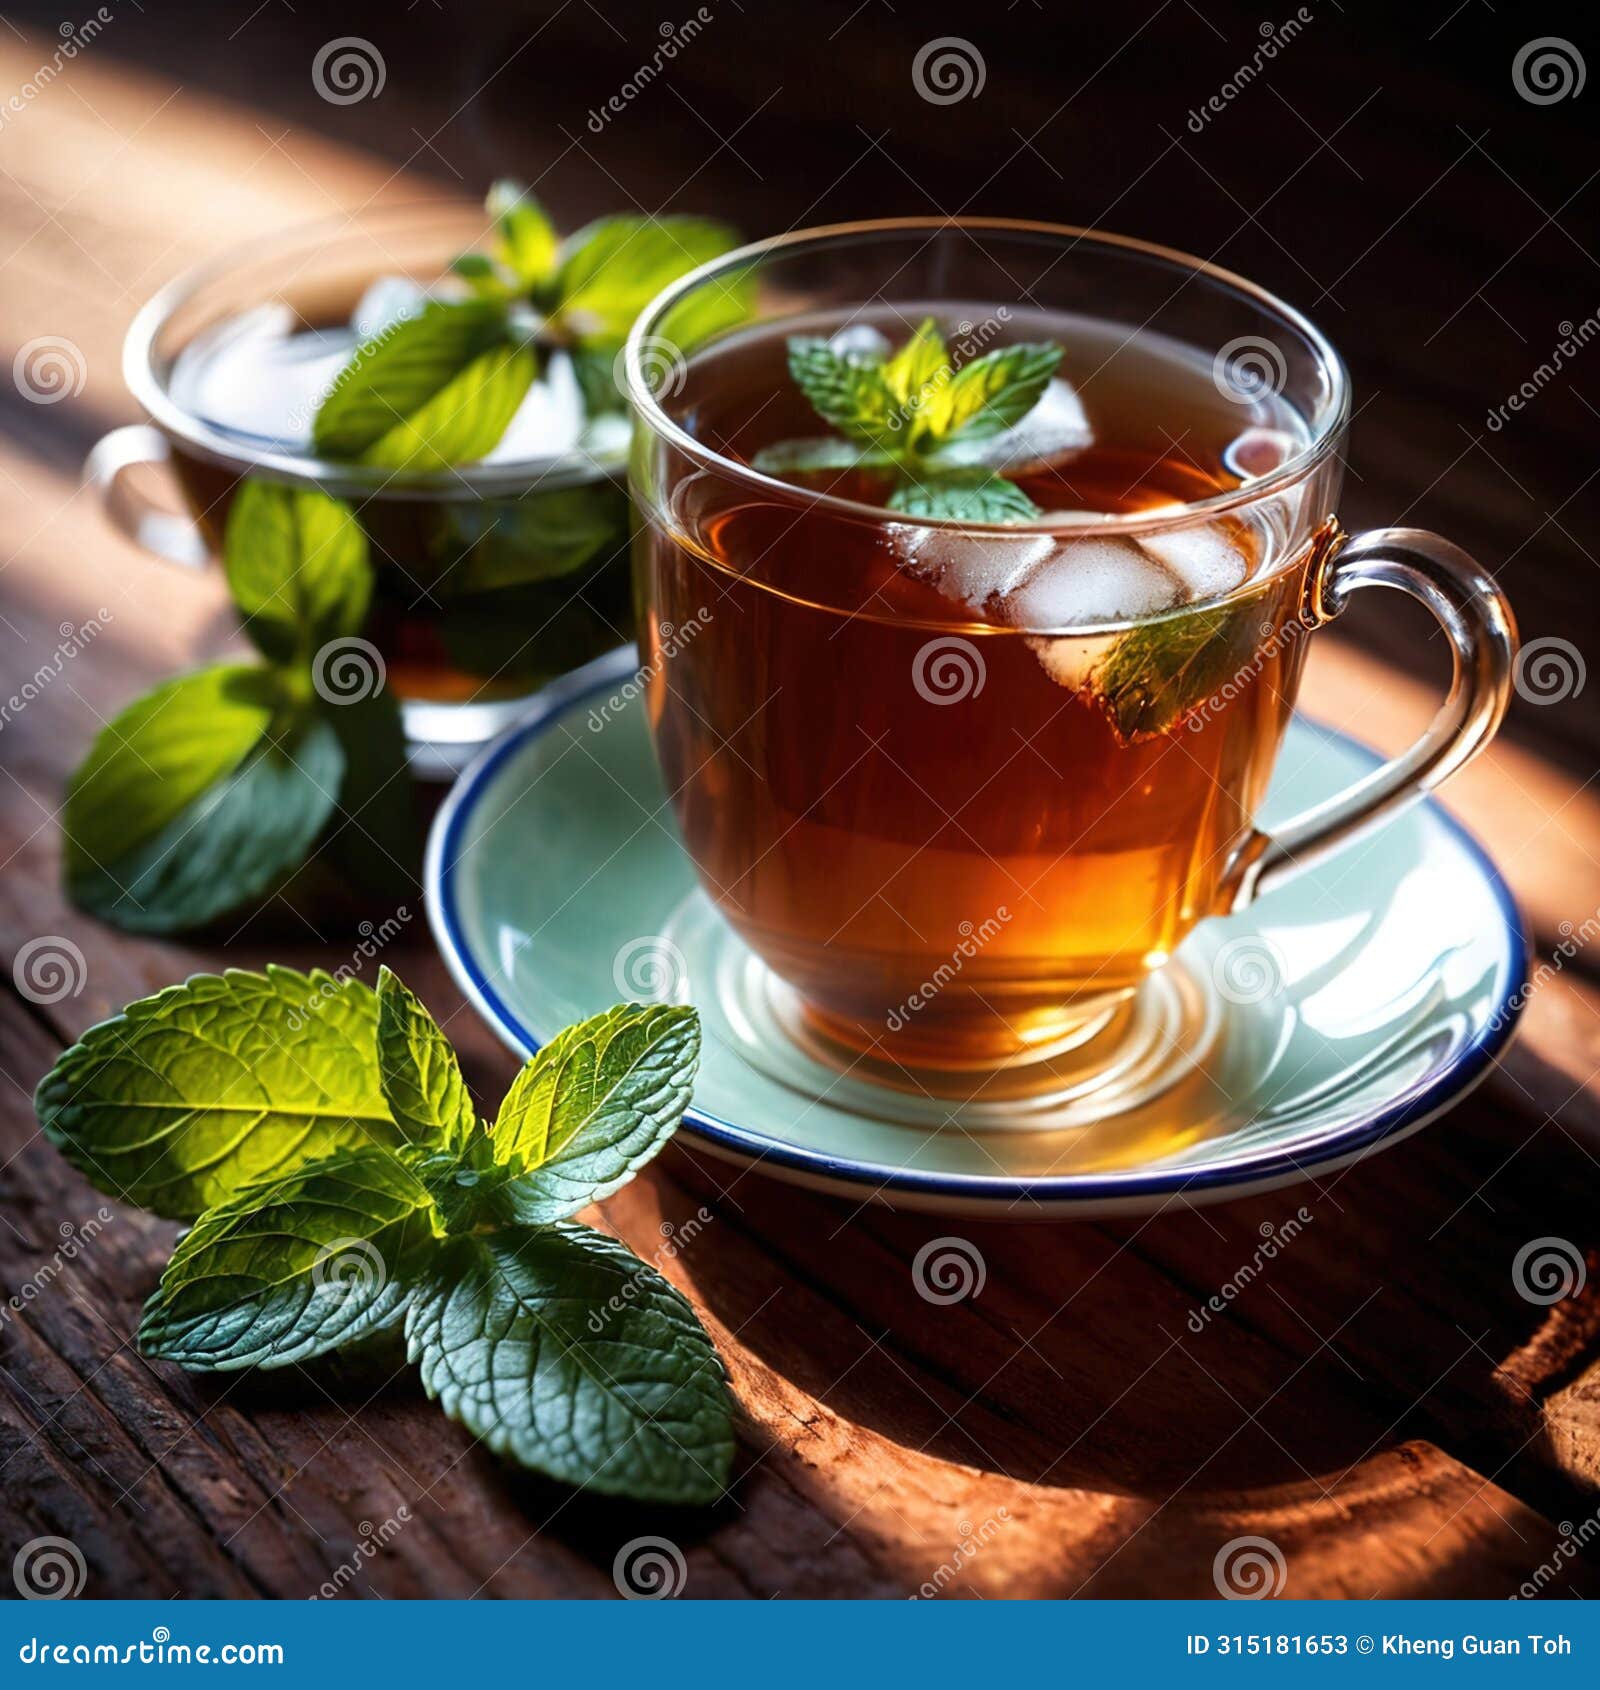 mint tea, fresh brewed herbal mint drink with mint and tea leaves